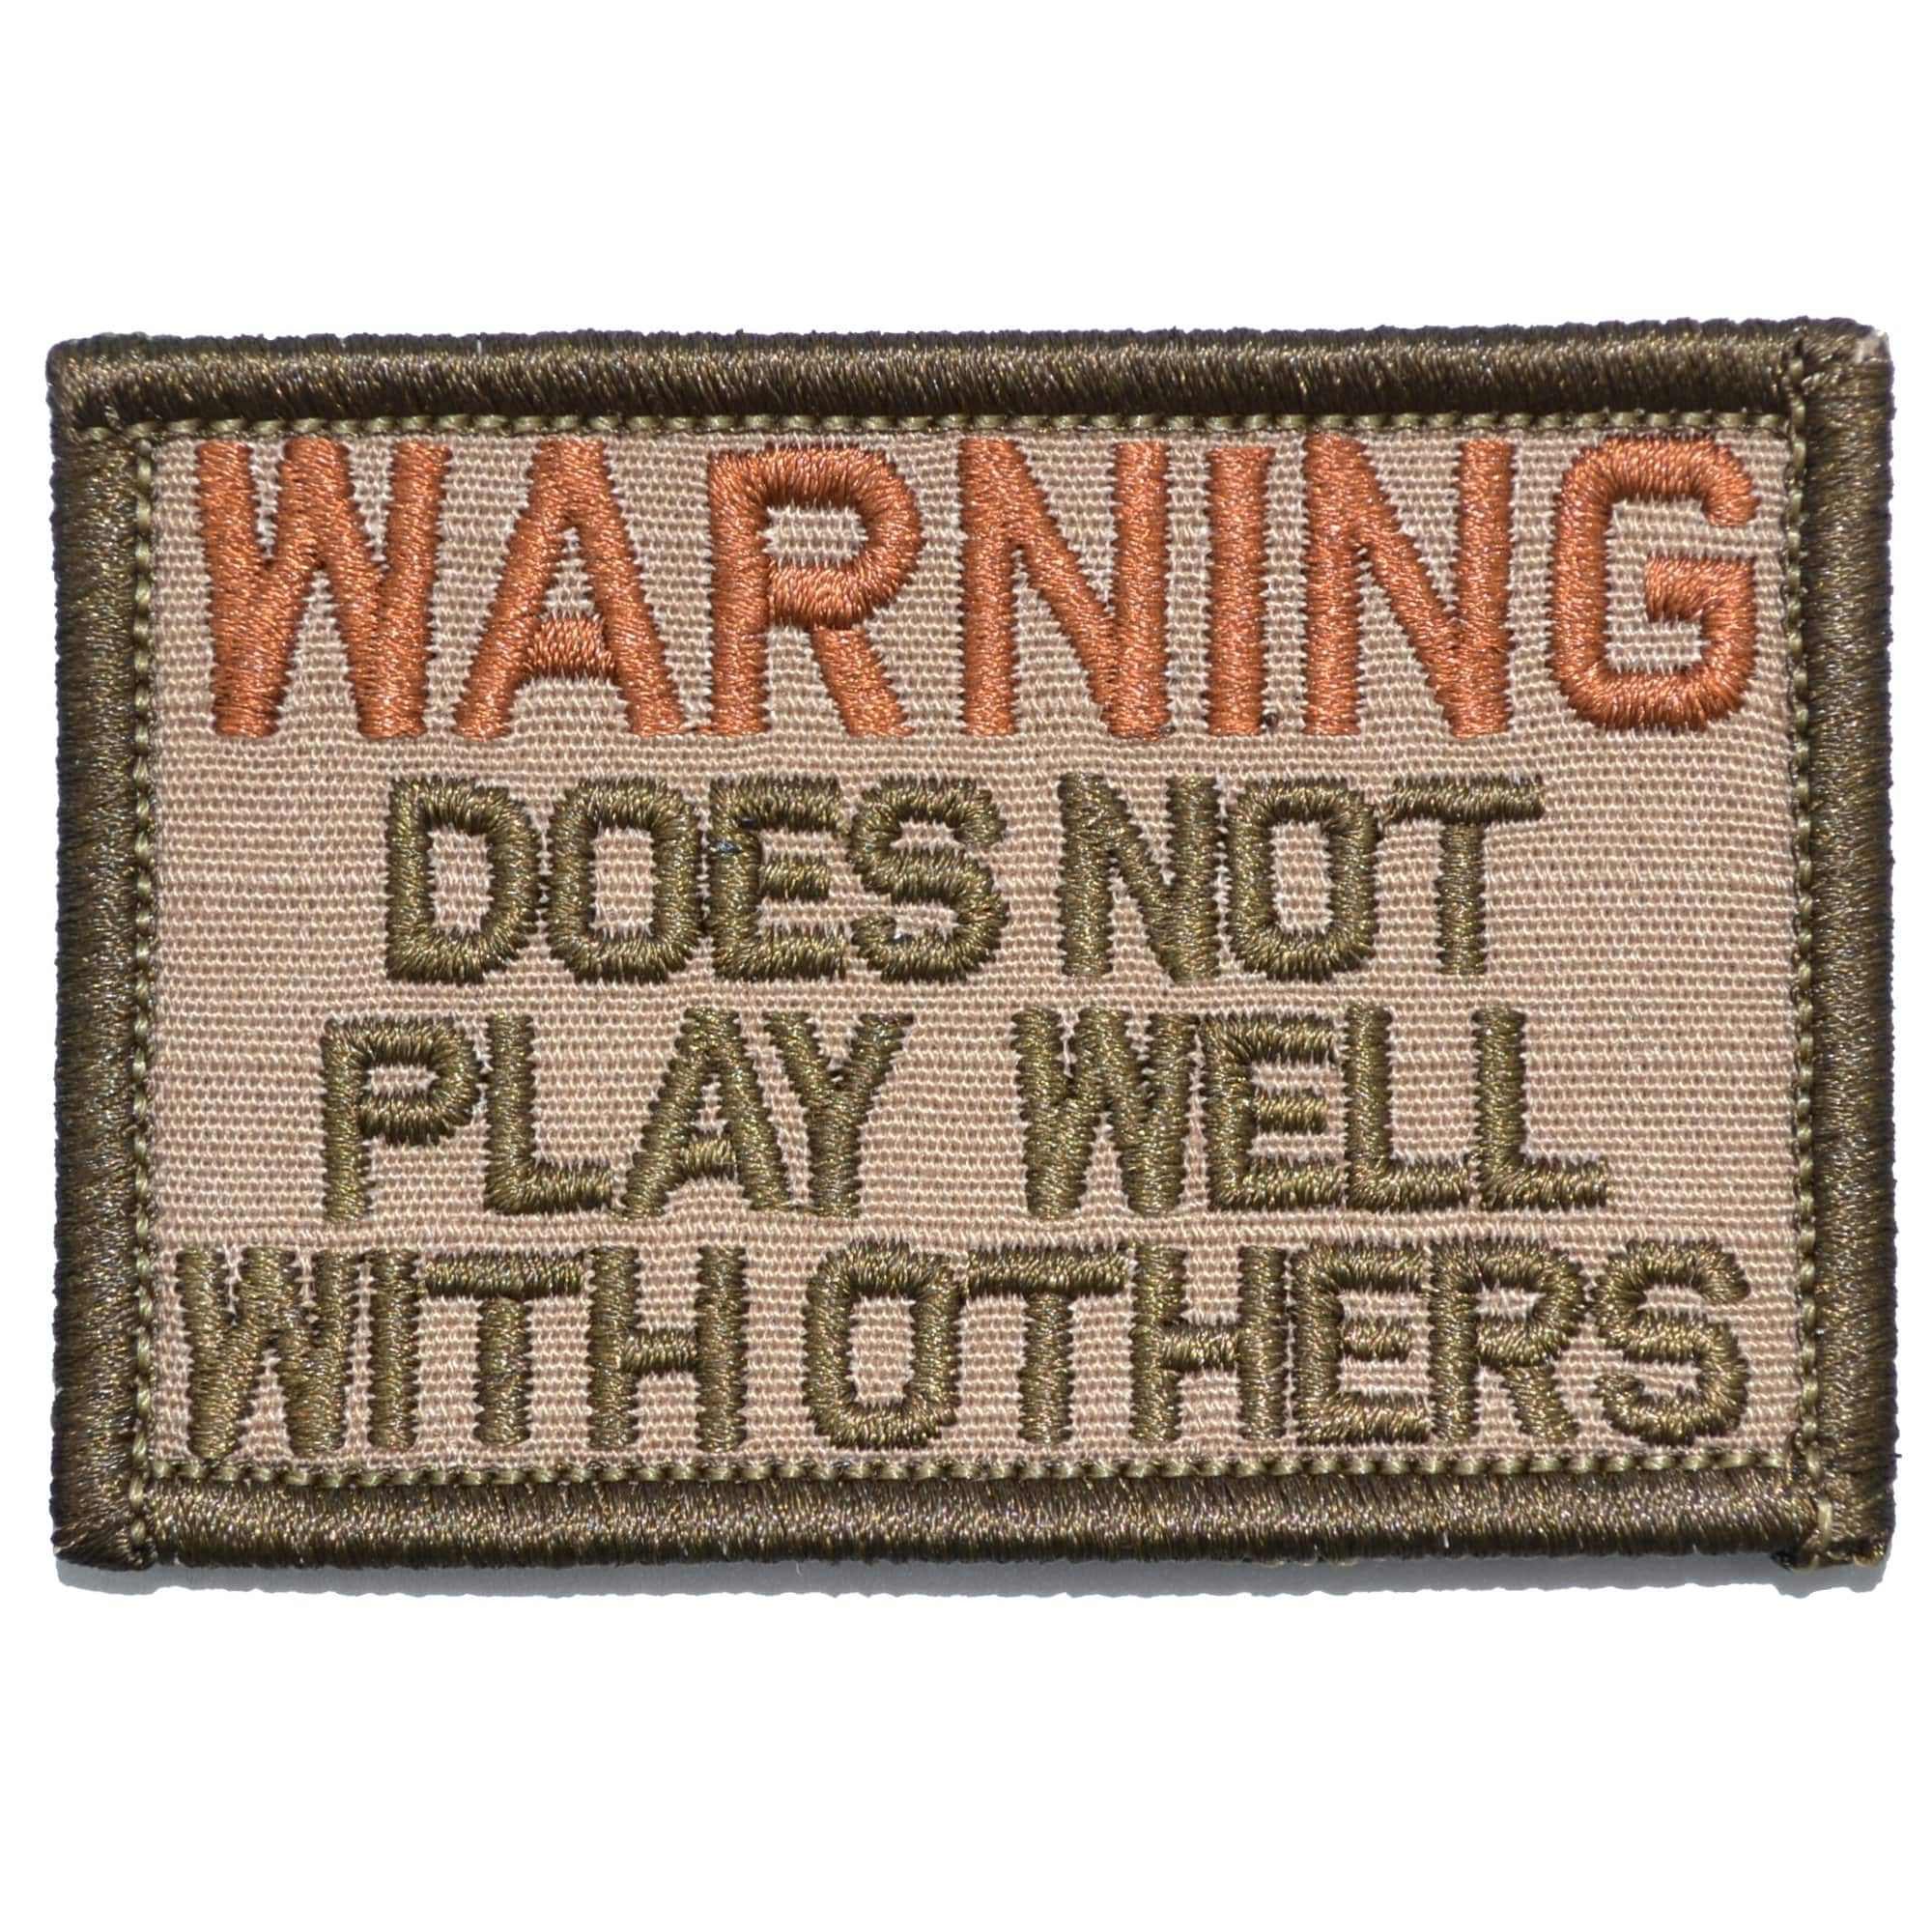 Tactical Gear Junkie Patches Coyote Brown WARNING: Does Not Play Well With Others - 2x3 Patch